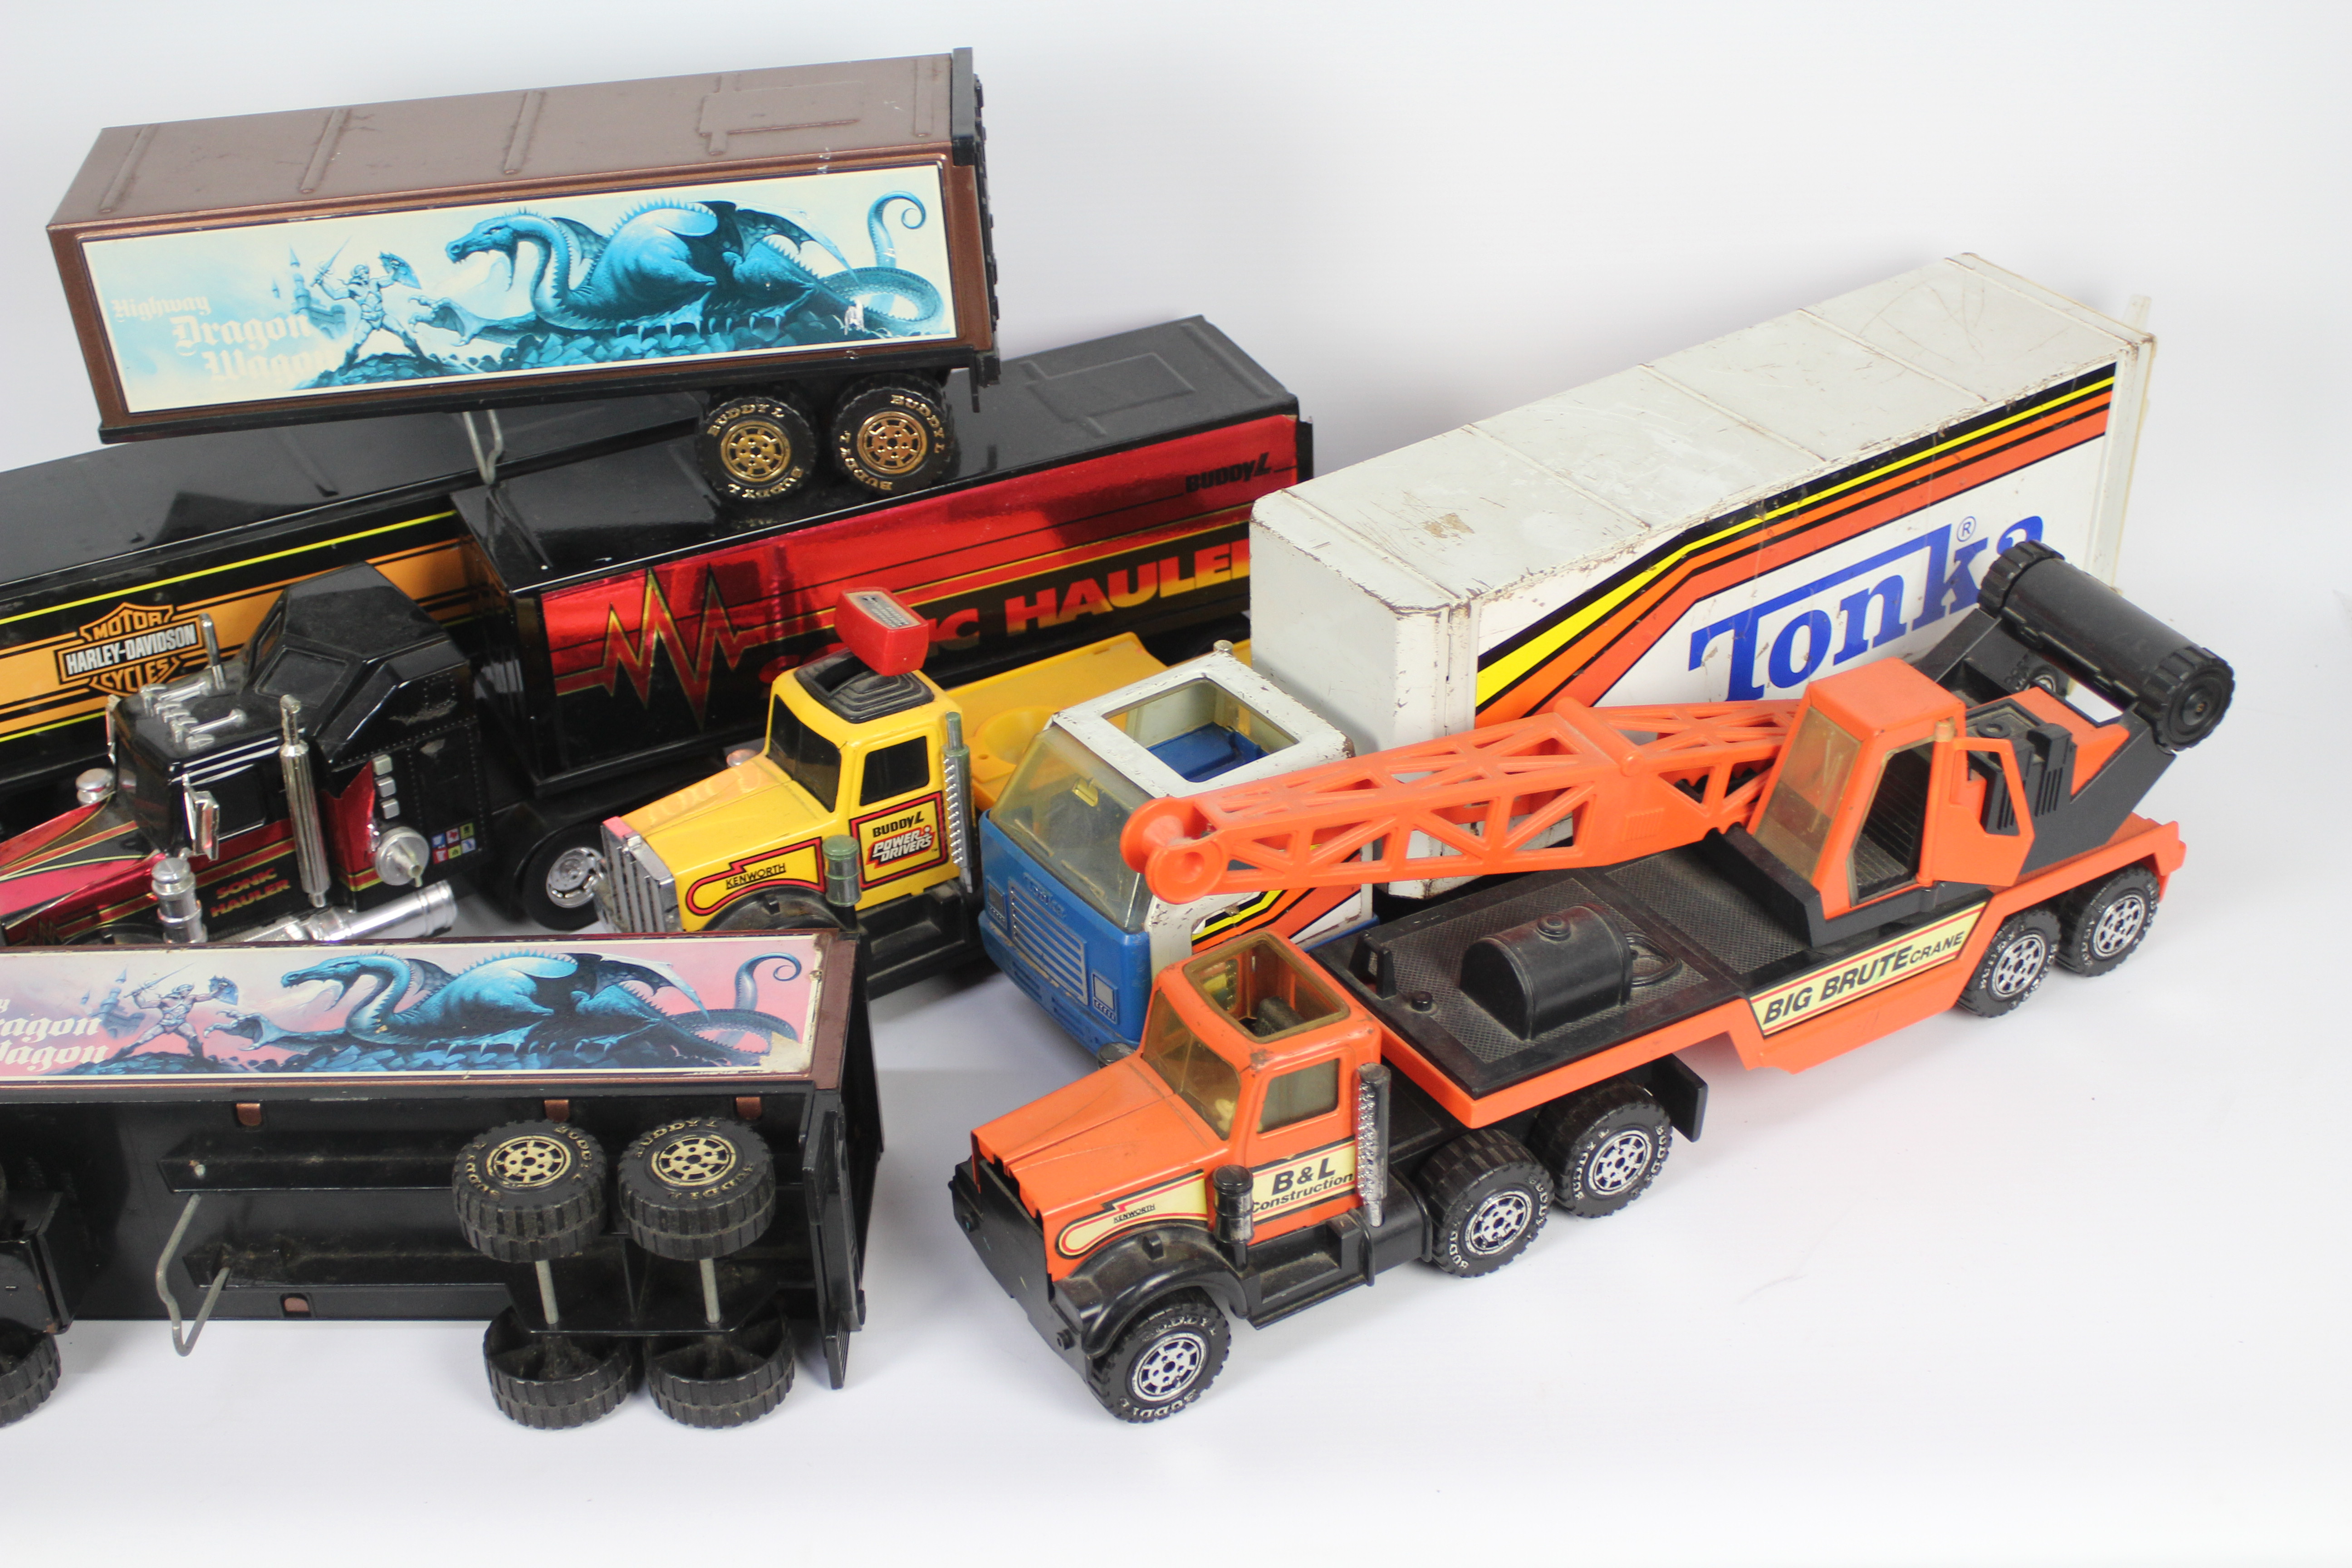 Buddy L - Tonka - 6 x vintage pressed steel American style trucks including a Sonic Hauler, - Image 3 of 3